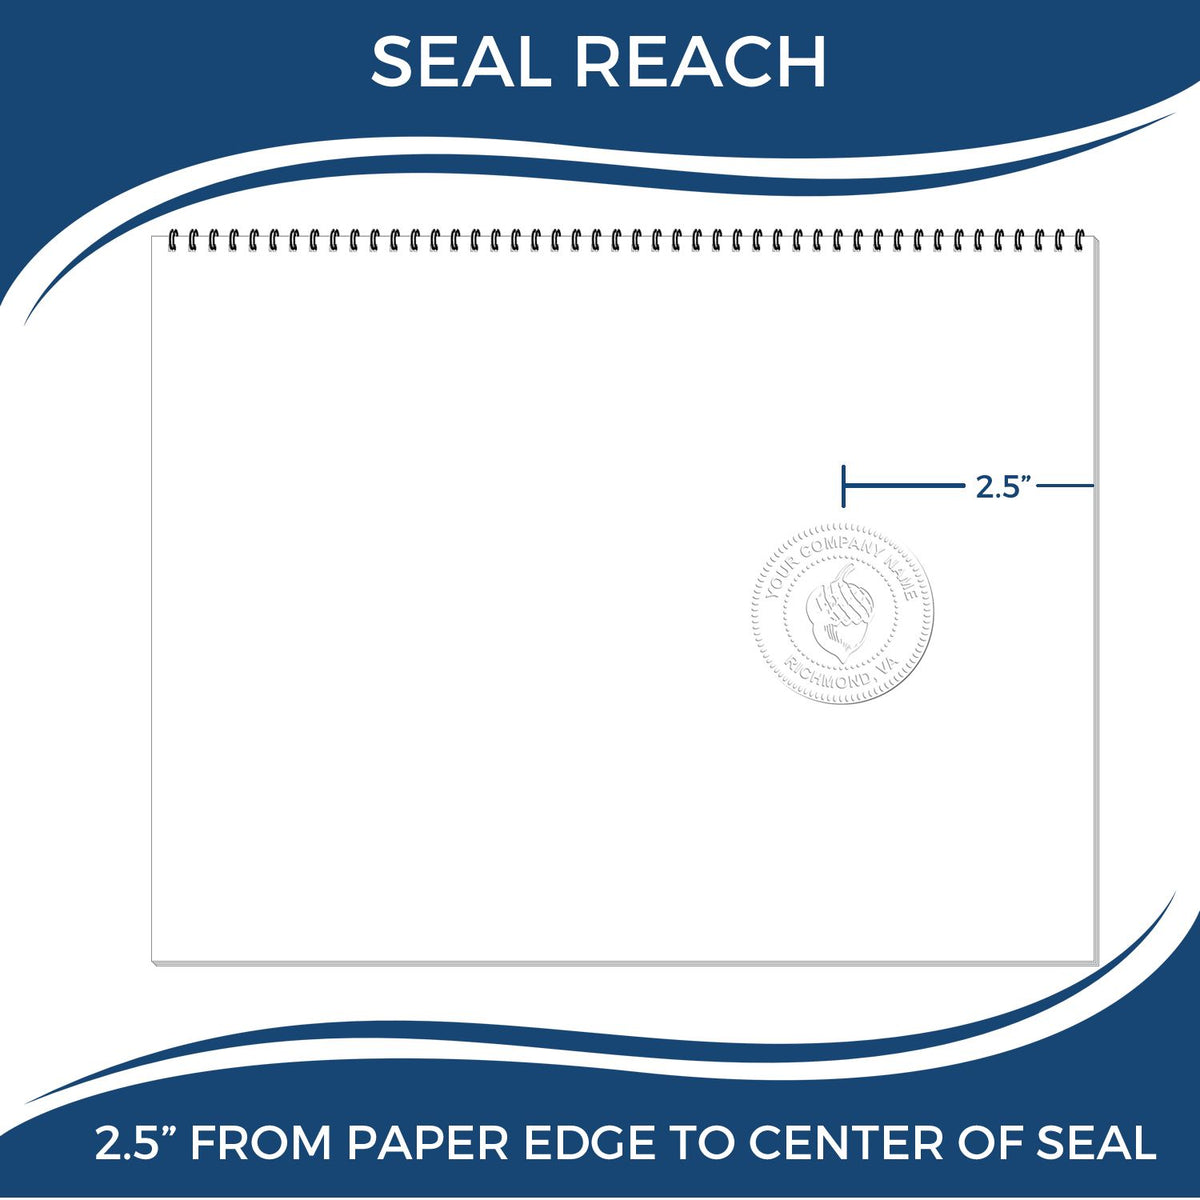 An infographic showing the seal reach which is represented by a ruler and a miniature seal image of the Heavy Duty Cast Iron West Virginia Architect Embosser